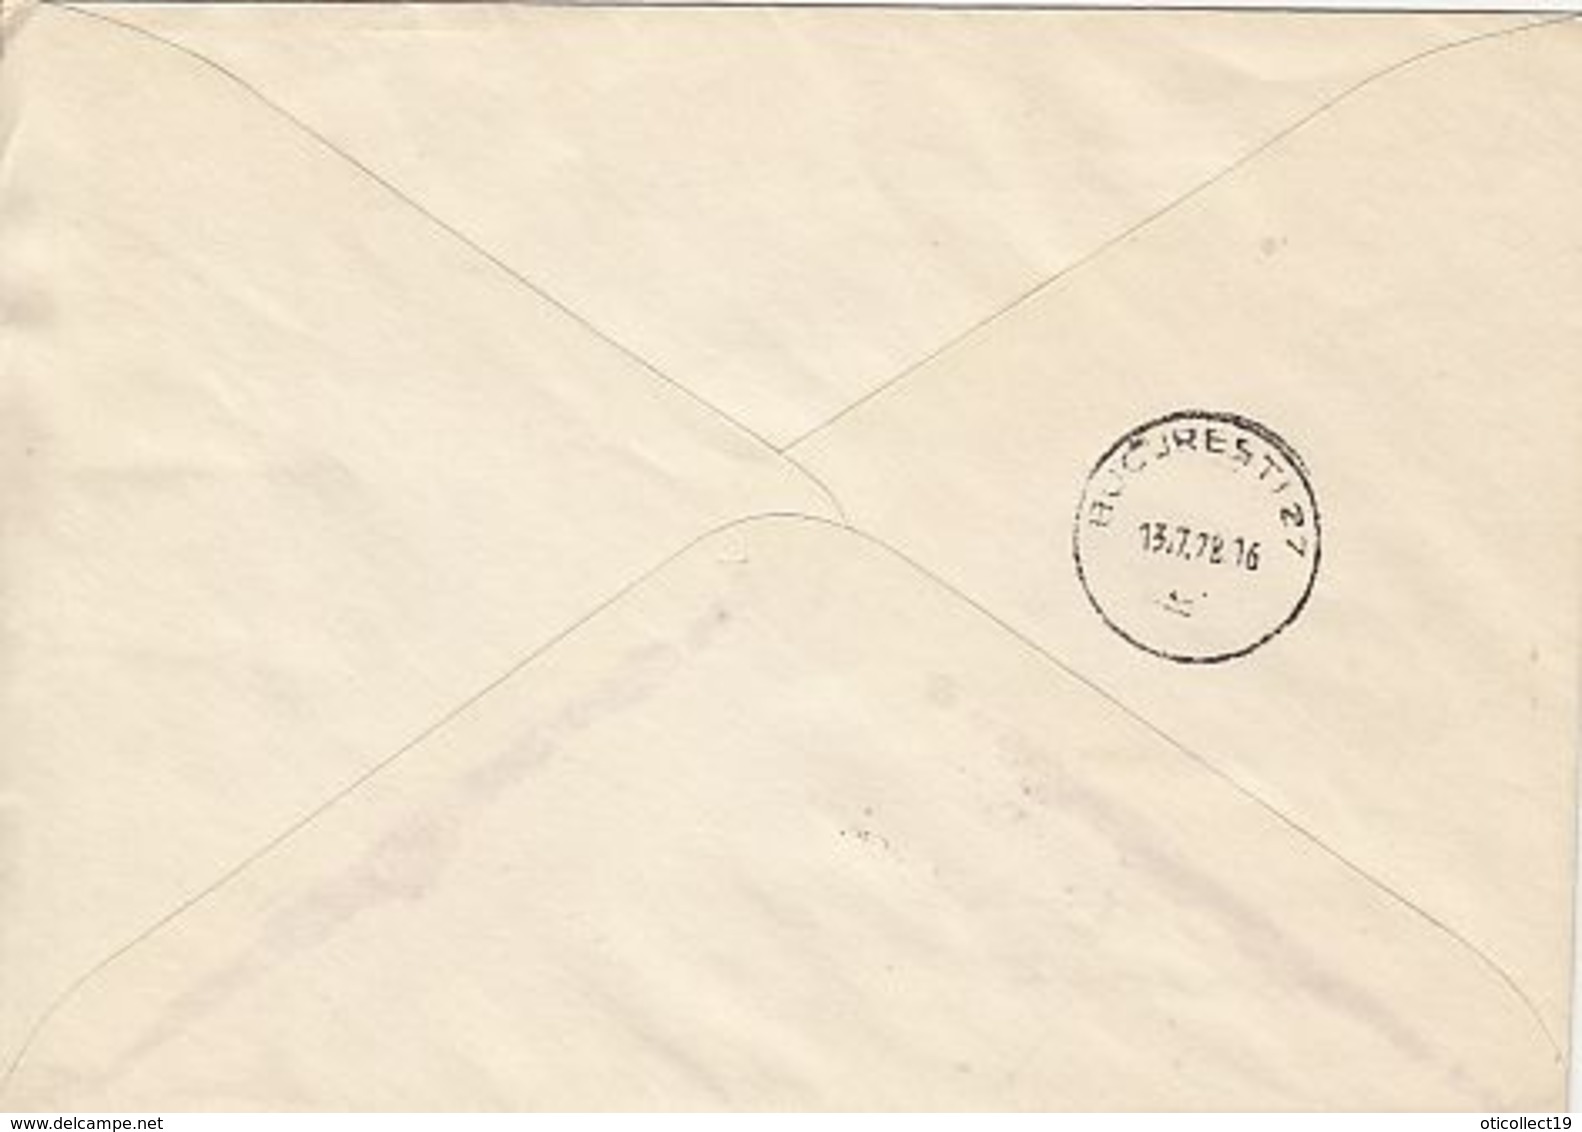 TOURISM, ARAD PARK HOTEL, SPECIAL COVER, 1978, ROMANIA - Hotel- & Gaststättengewerbe